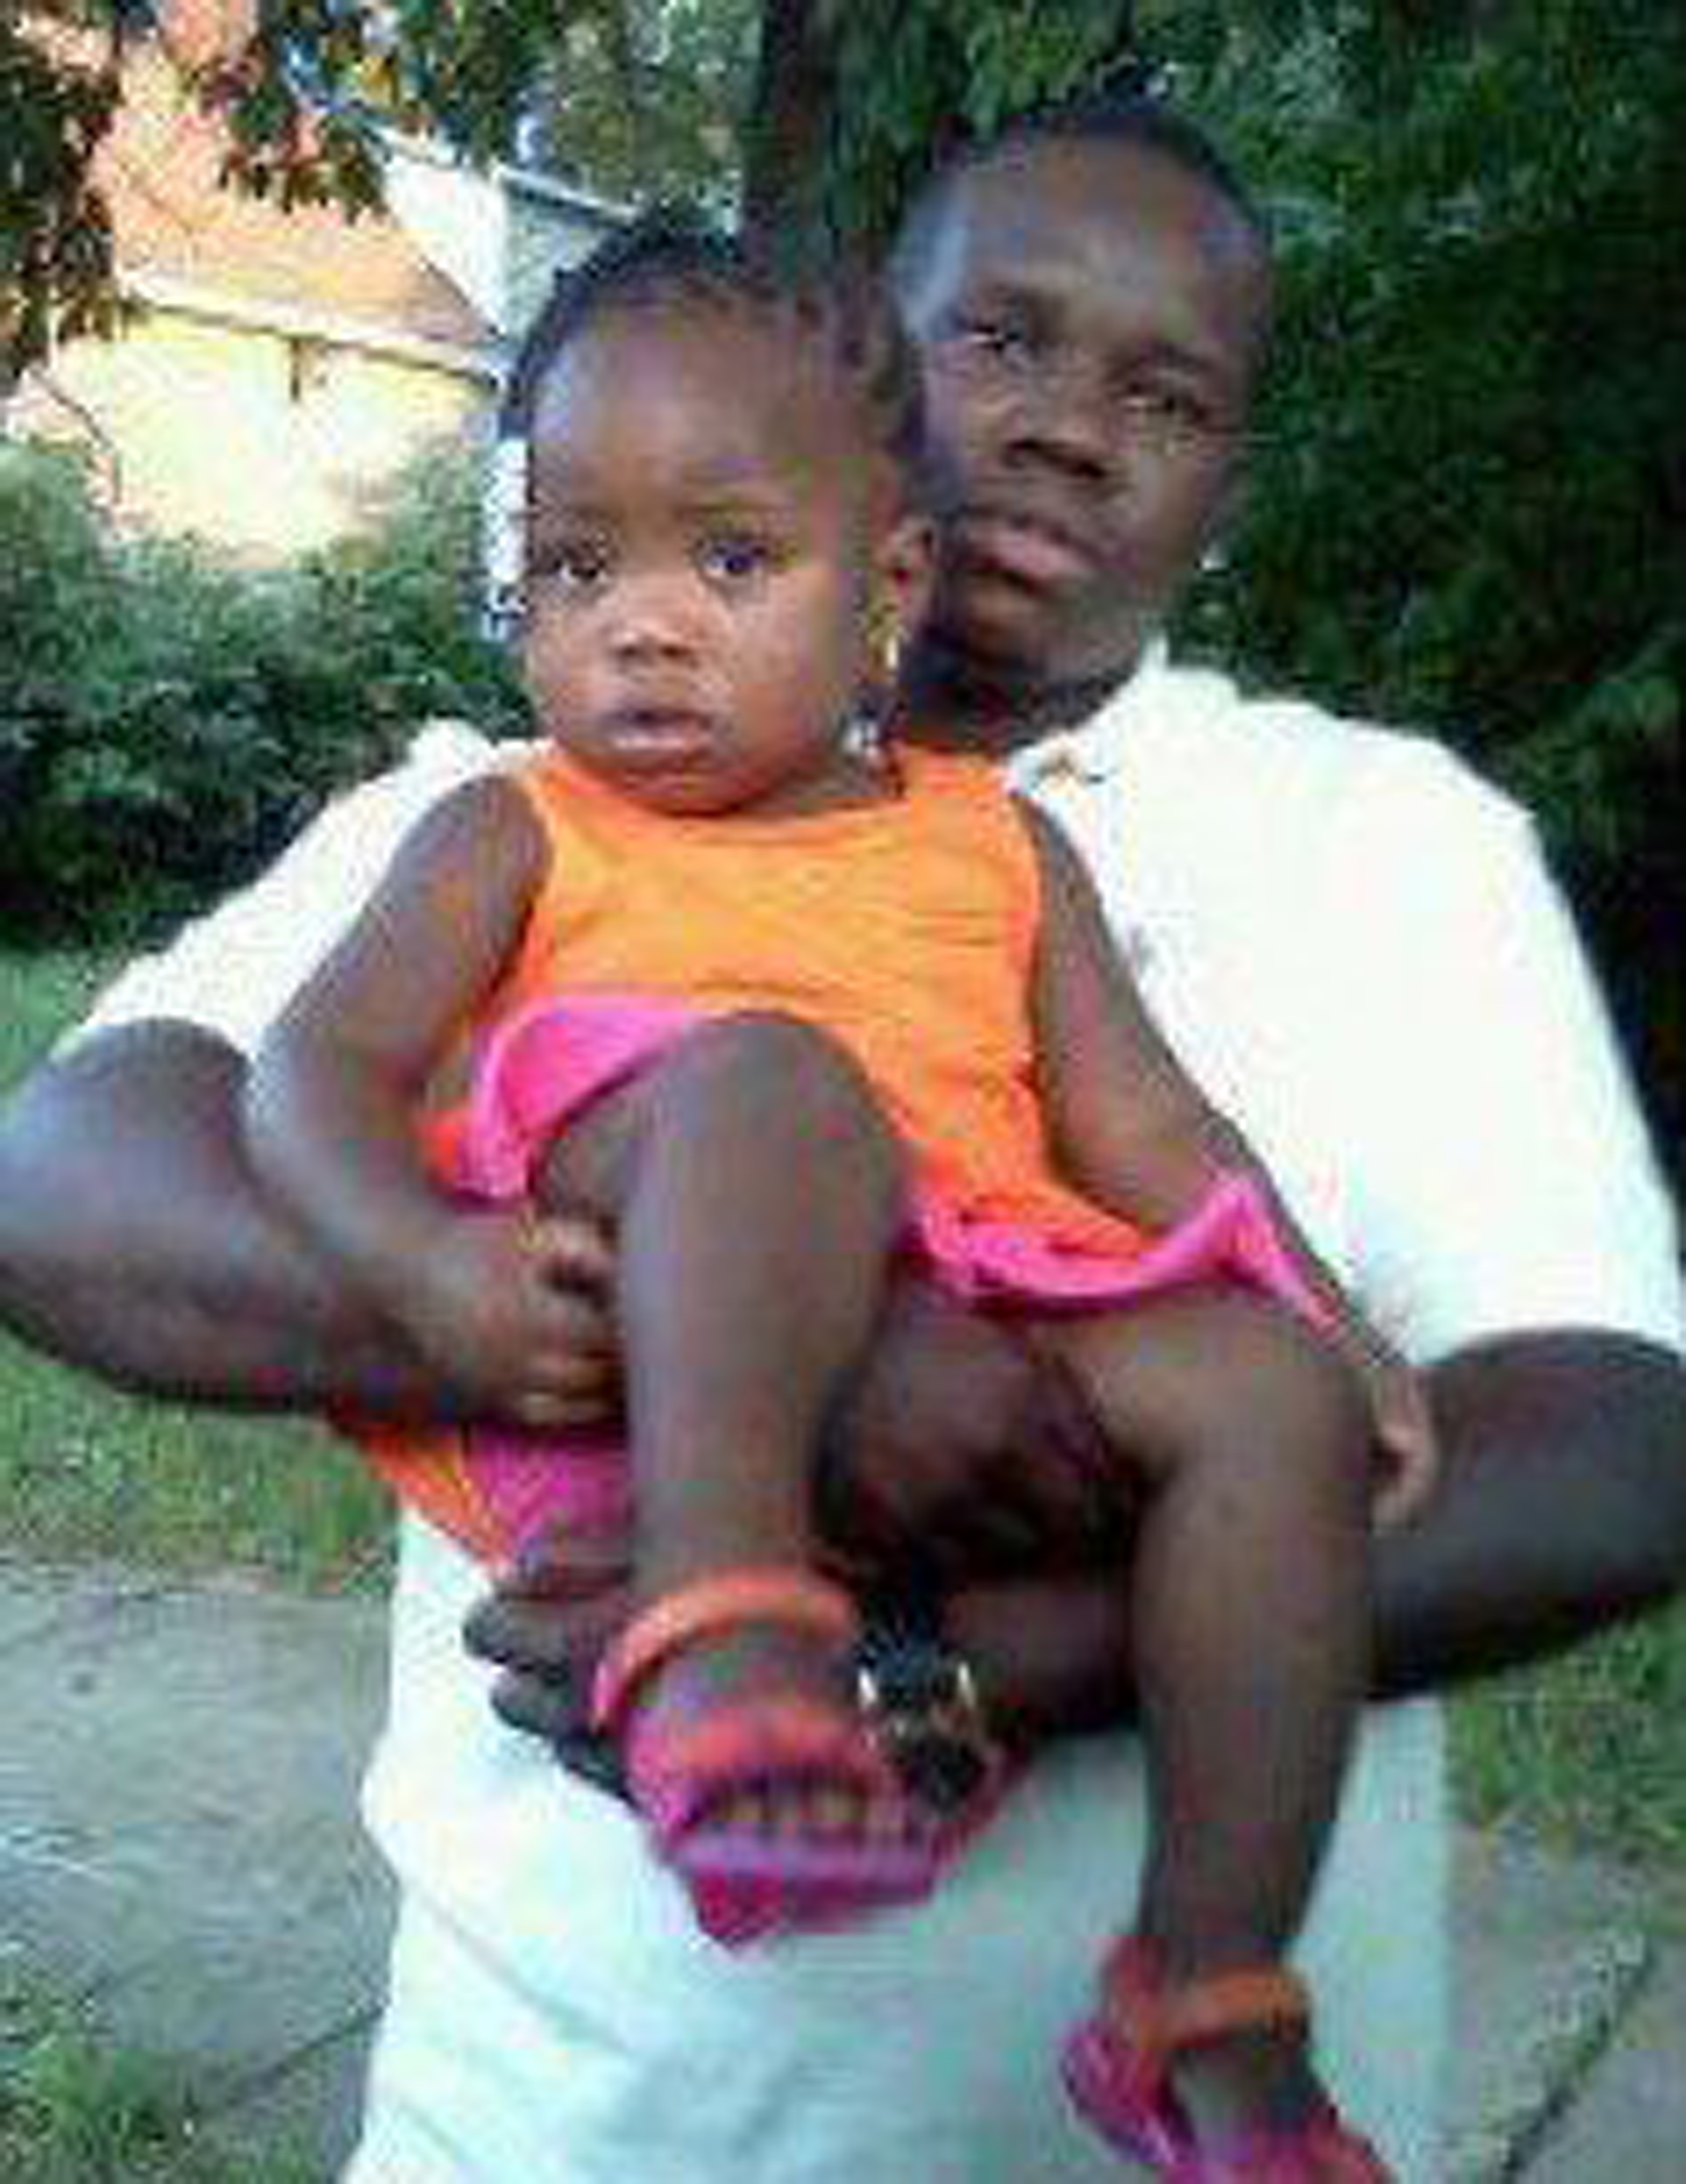 Anthony Lamar Smith and his daughter.